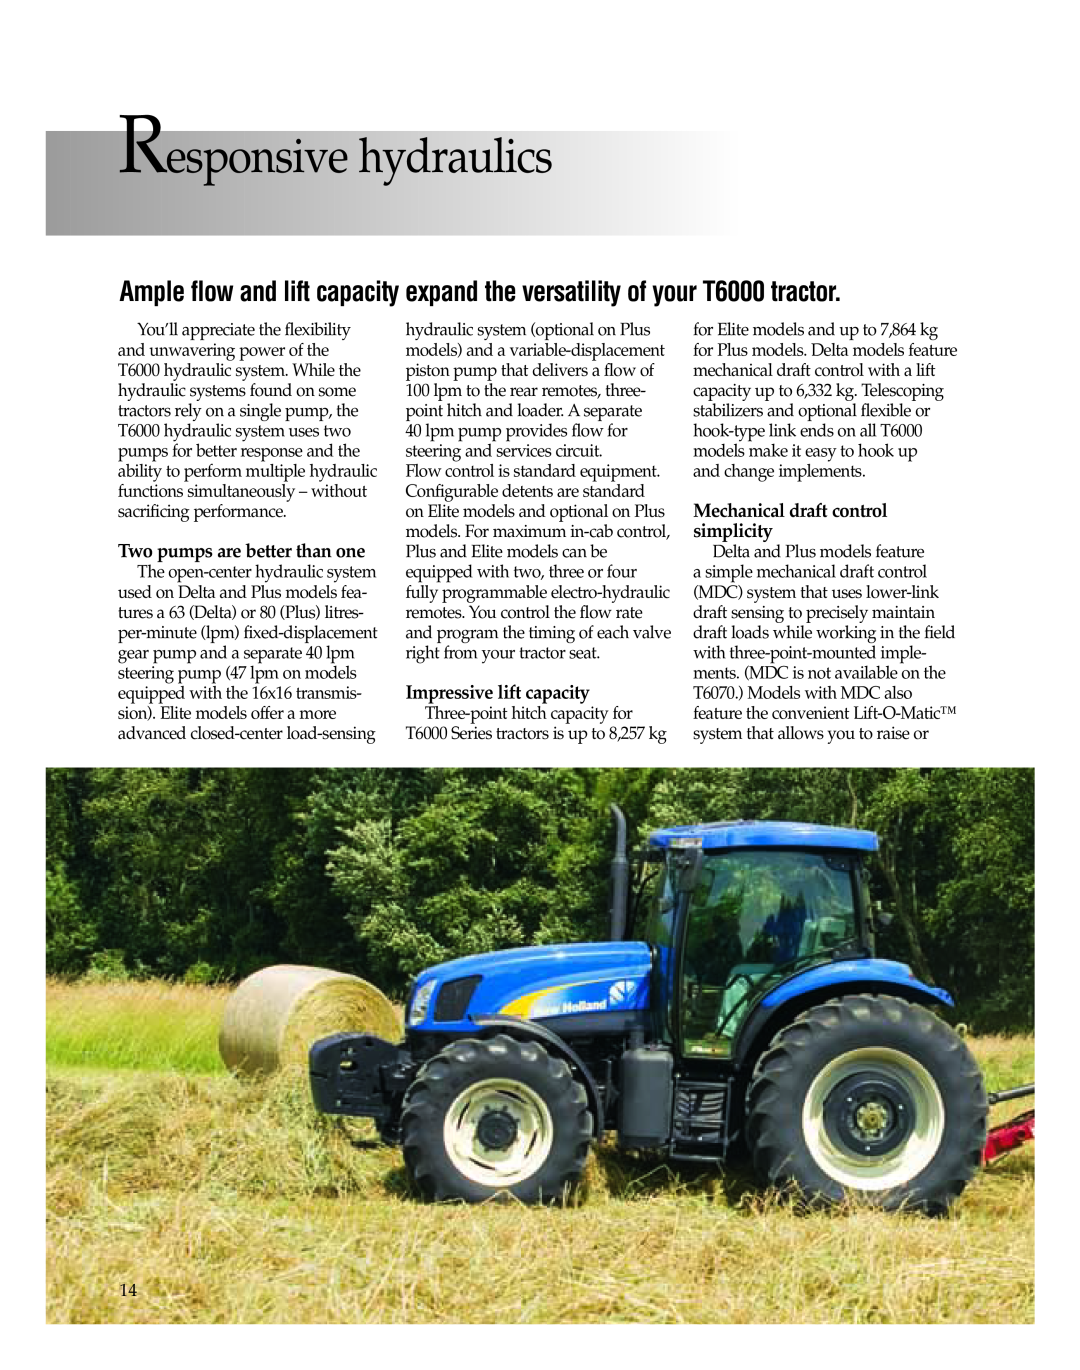 New Holland T6010, T6080, T6040, T6060, T6070 Responsivehydraulics, Two pumps are better than one, Impressive lift capacity 